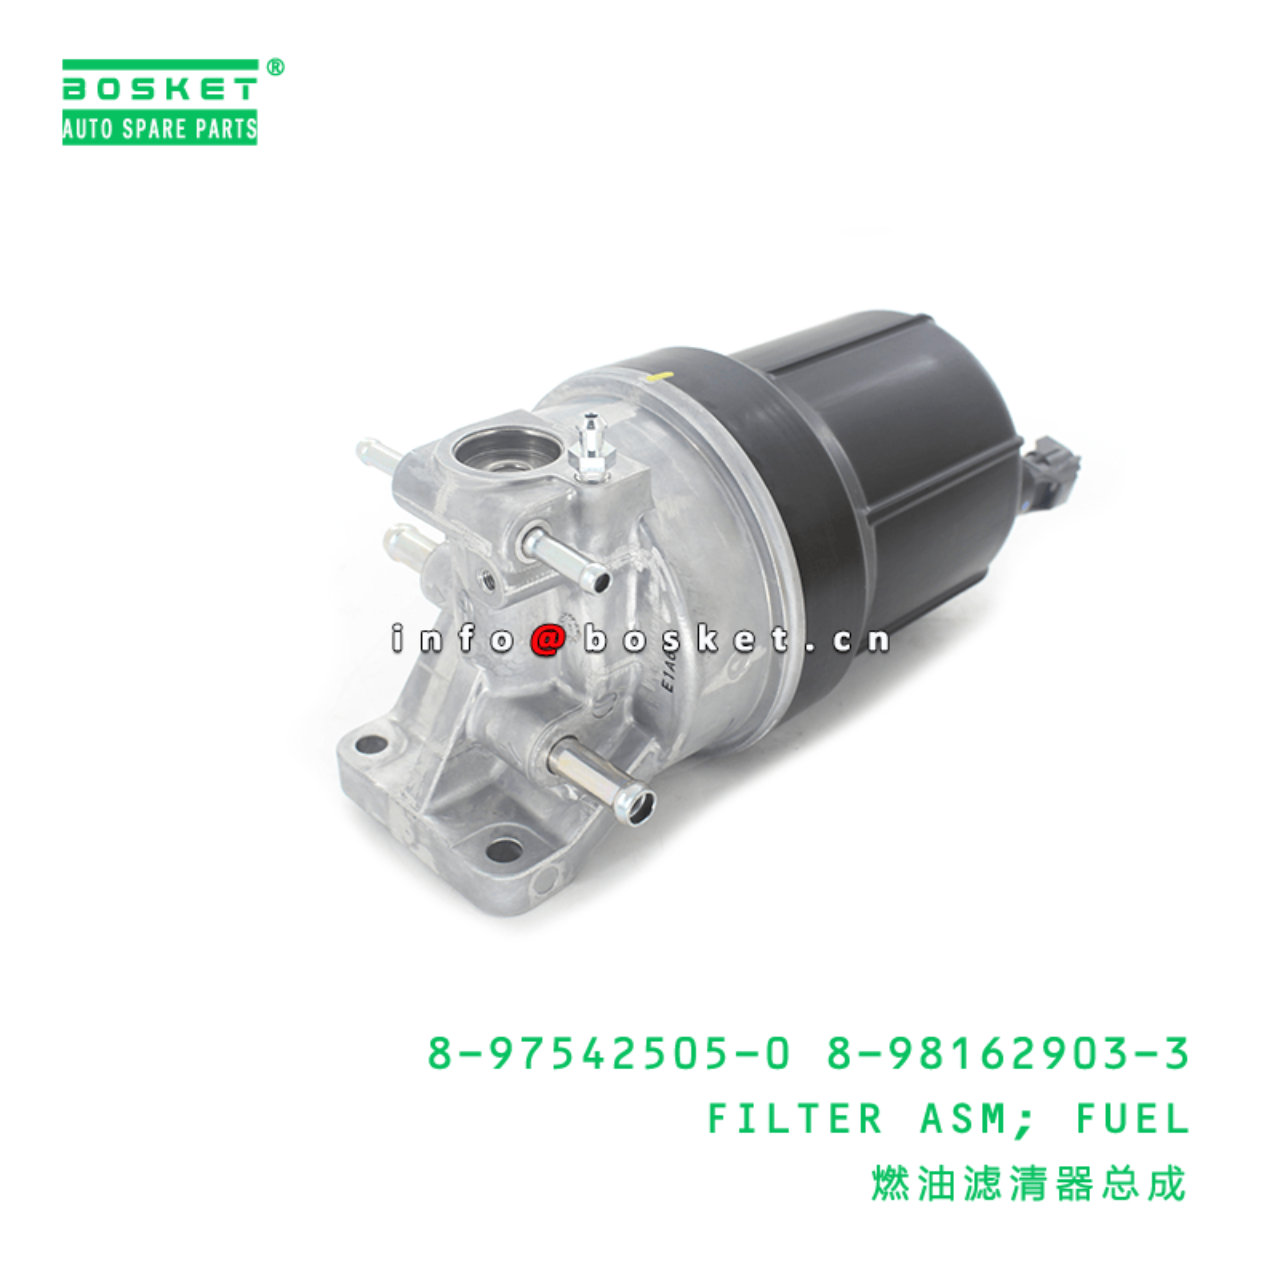 8-97542505-0 8-98162903-3 Fuel Filter Assembly 8975425050 8981629033 Suitable for ISUZU NKR NMR